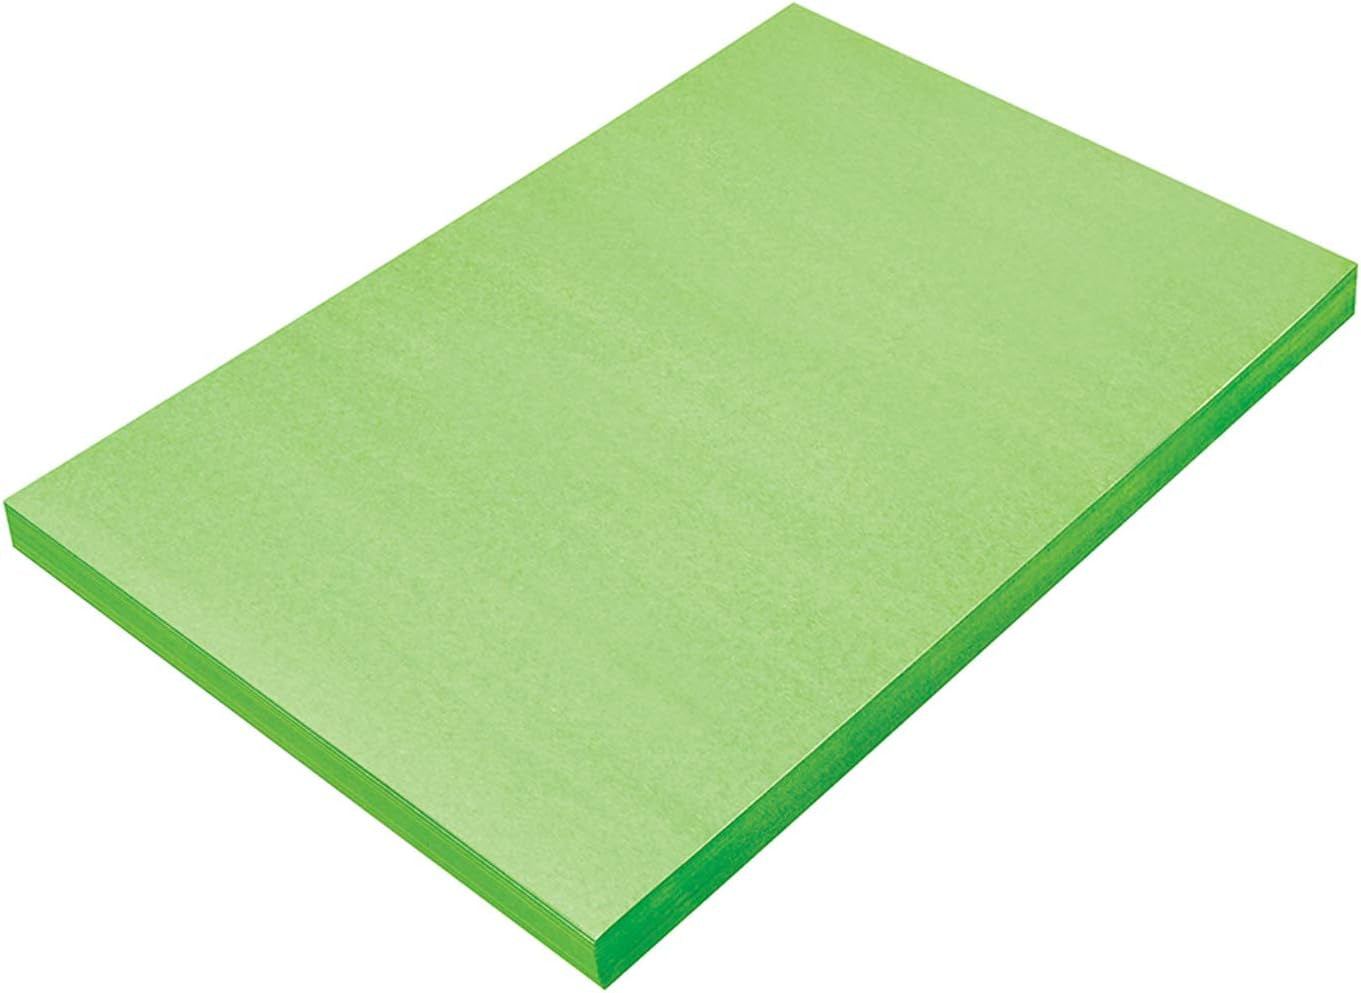 (Formerly Sunworks) Construction Paper, Bright White, 12" X 18", 100 Sheets